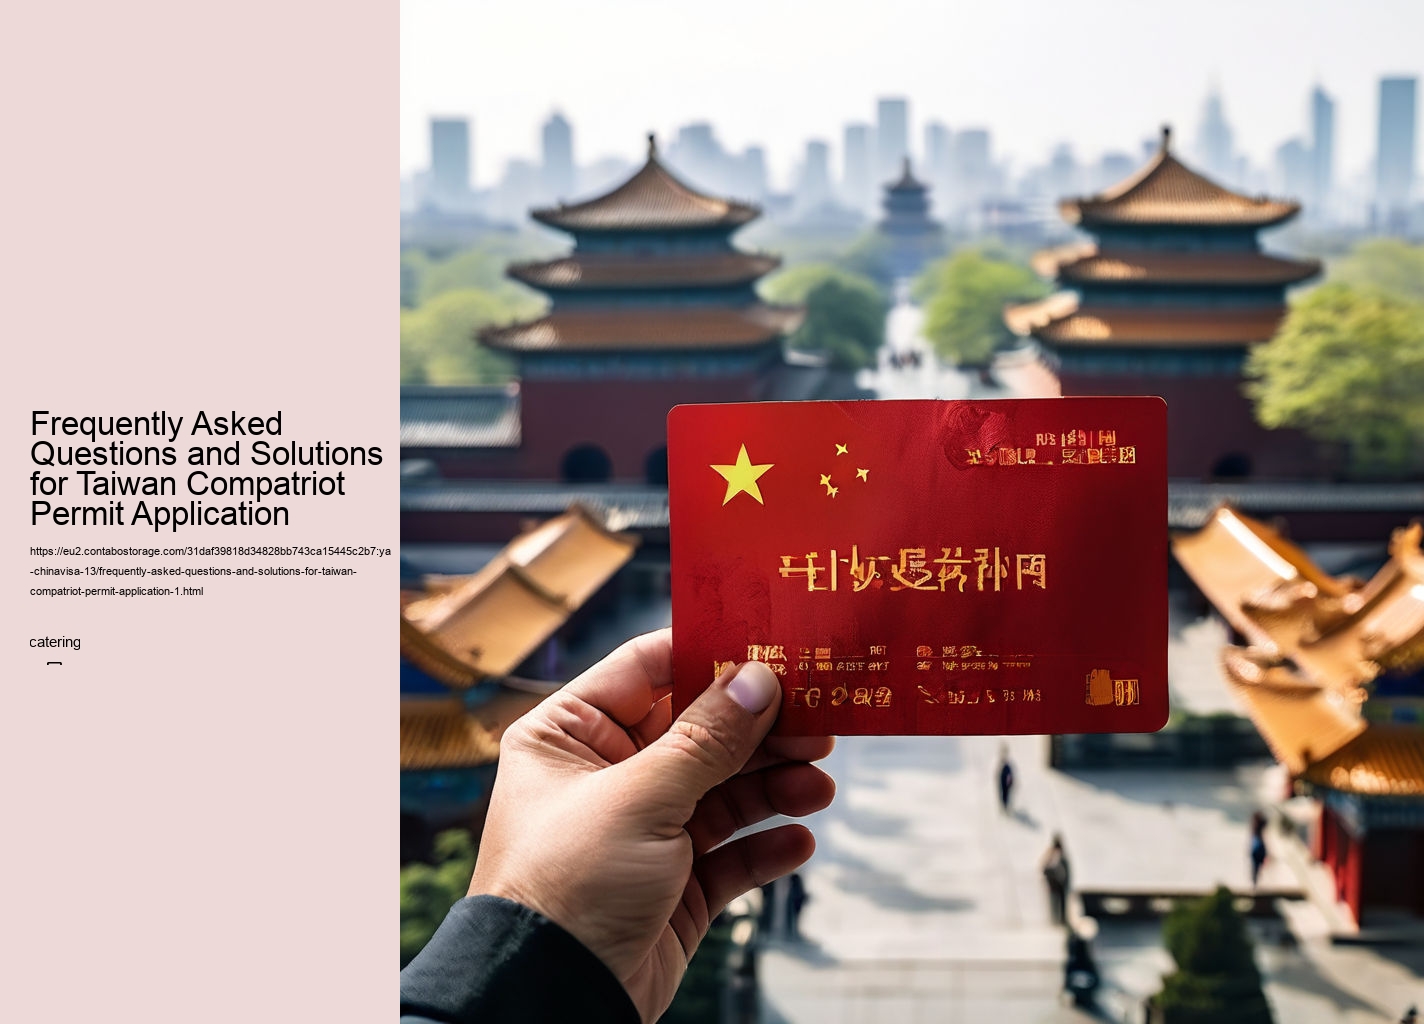 Frequently Asked Questions and Solutions for Taiwan Compatriot Permit Application